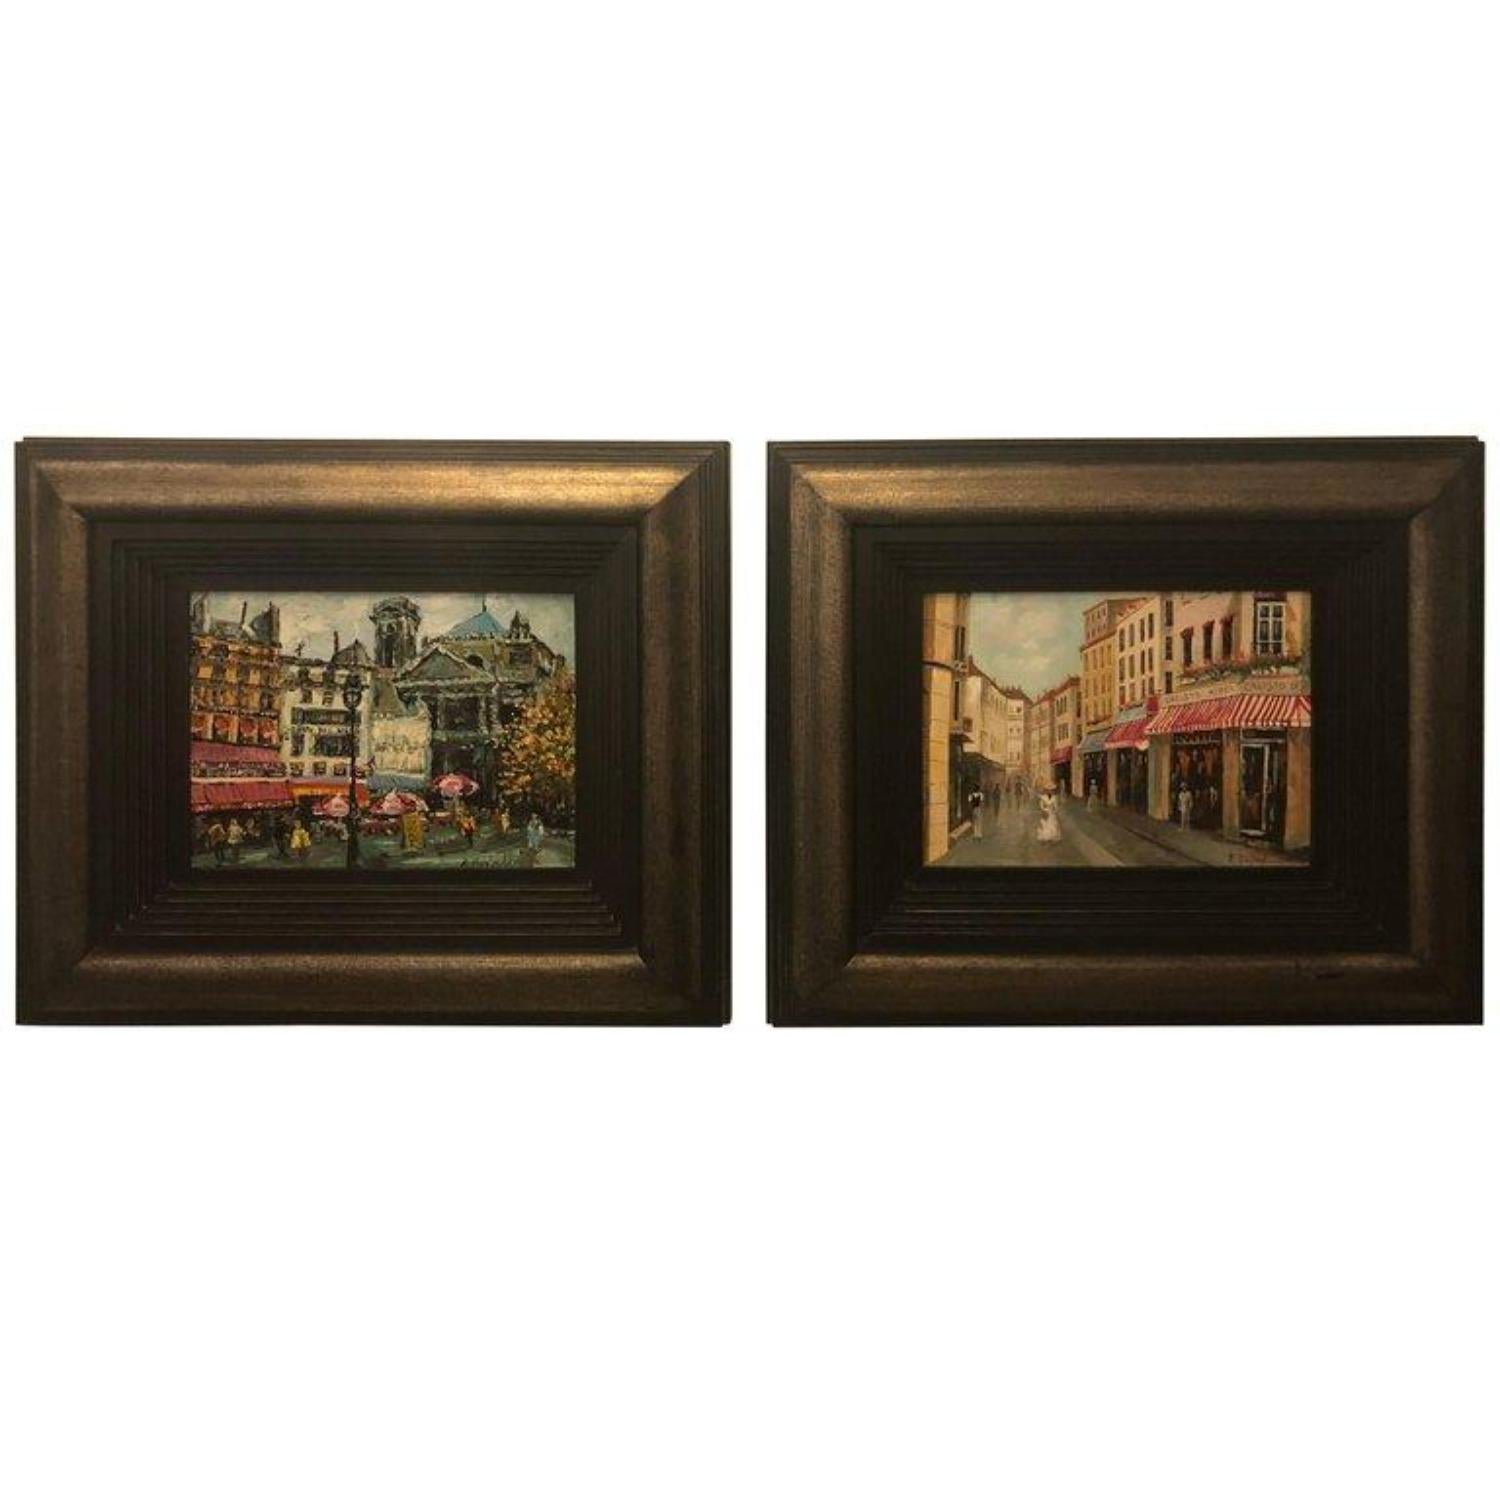 Unknown Landscape Painting - Parisian Street Scenes Oil on Canvas Painting Signed R. Roywilsens, a Pair 